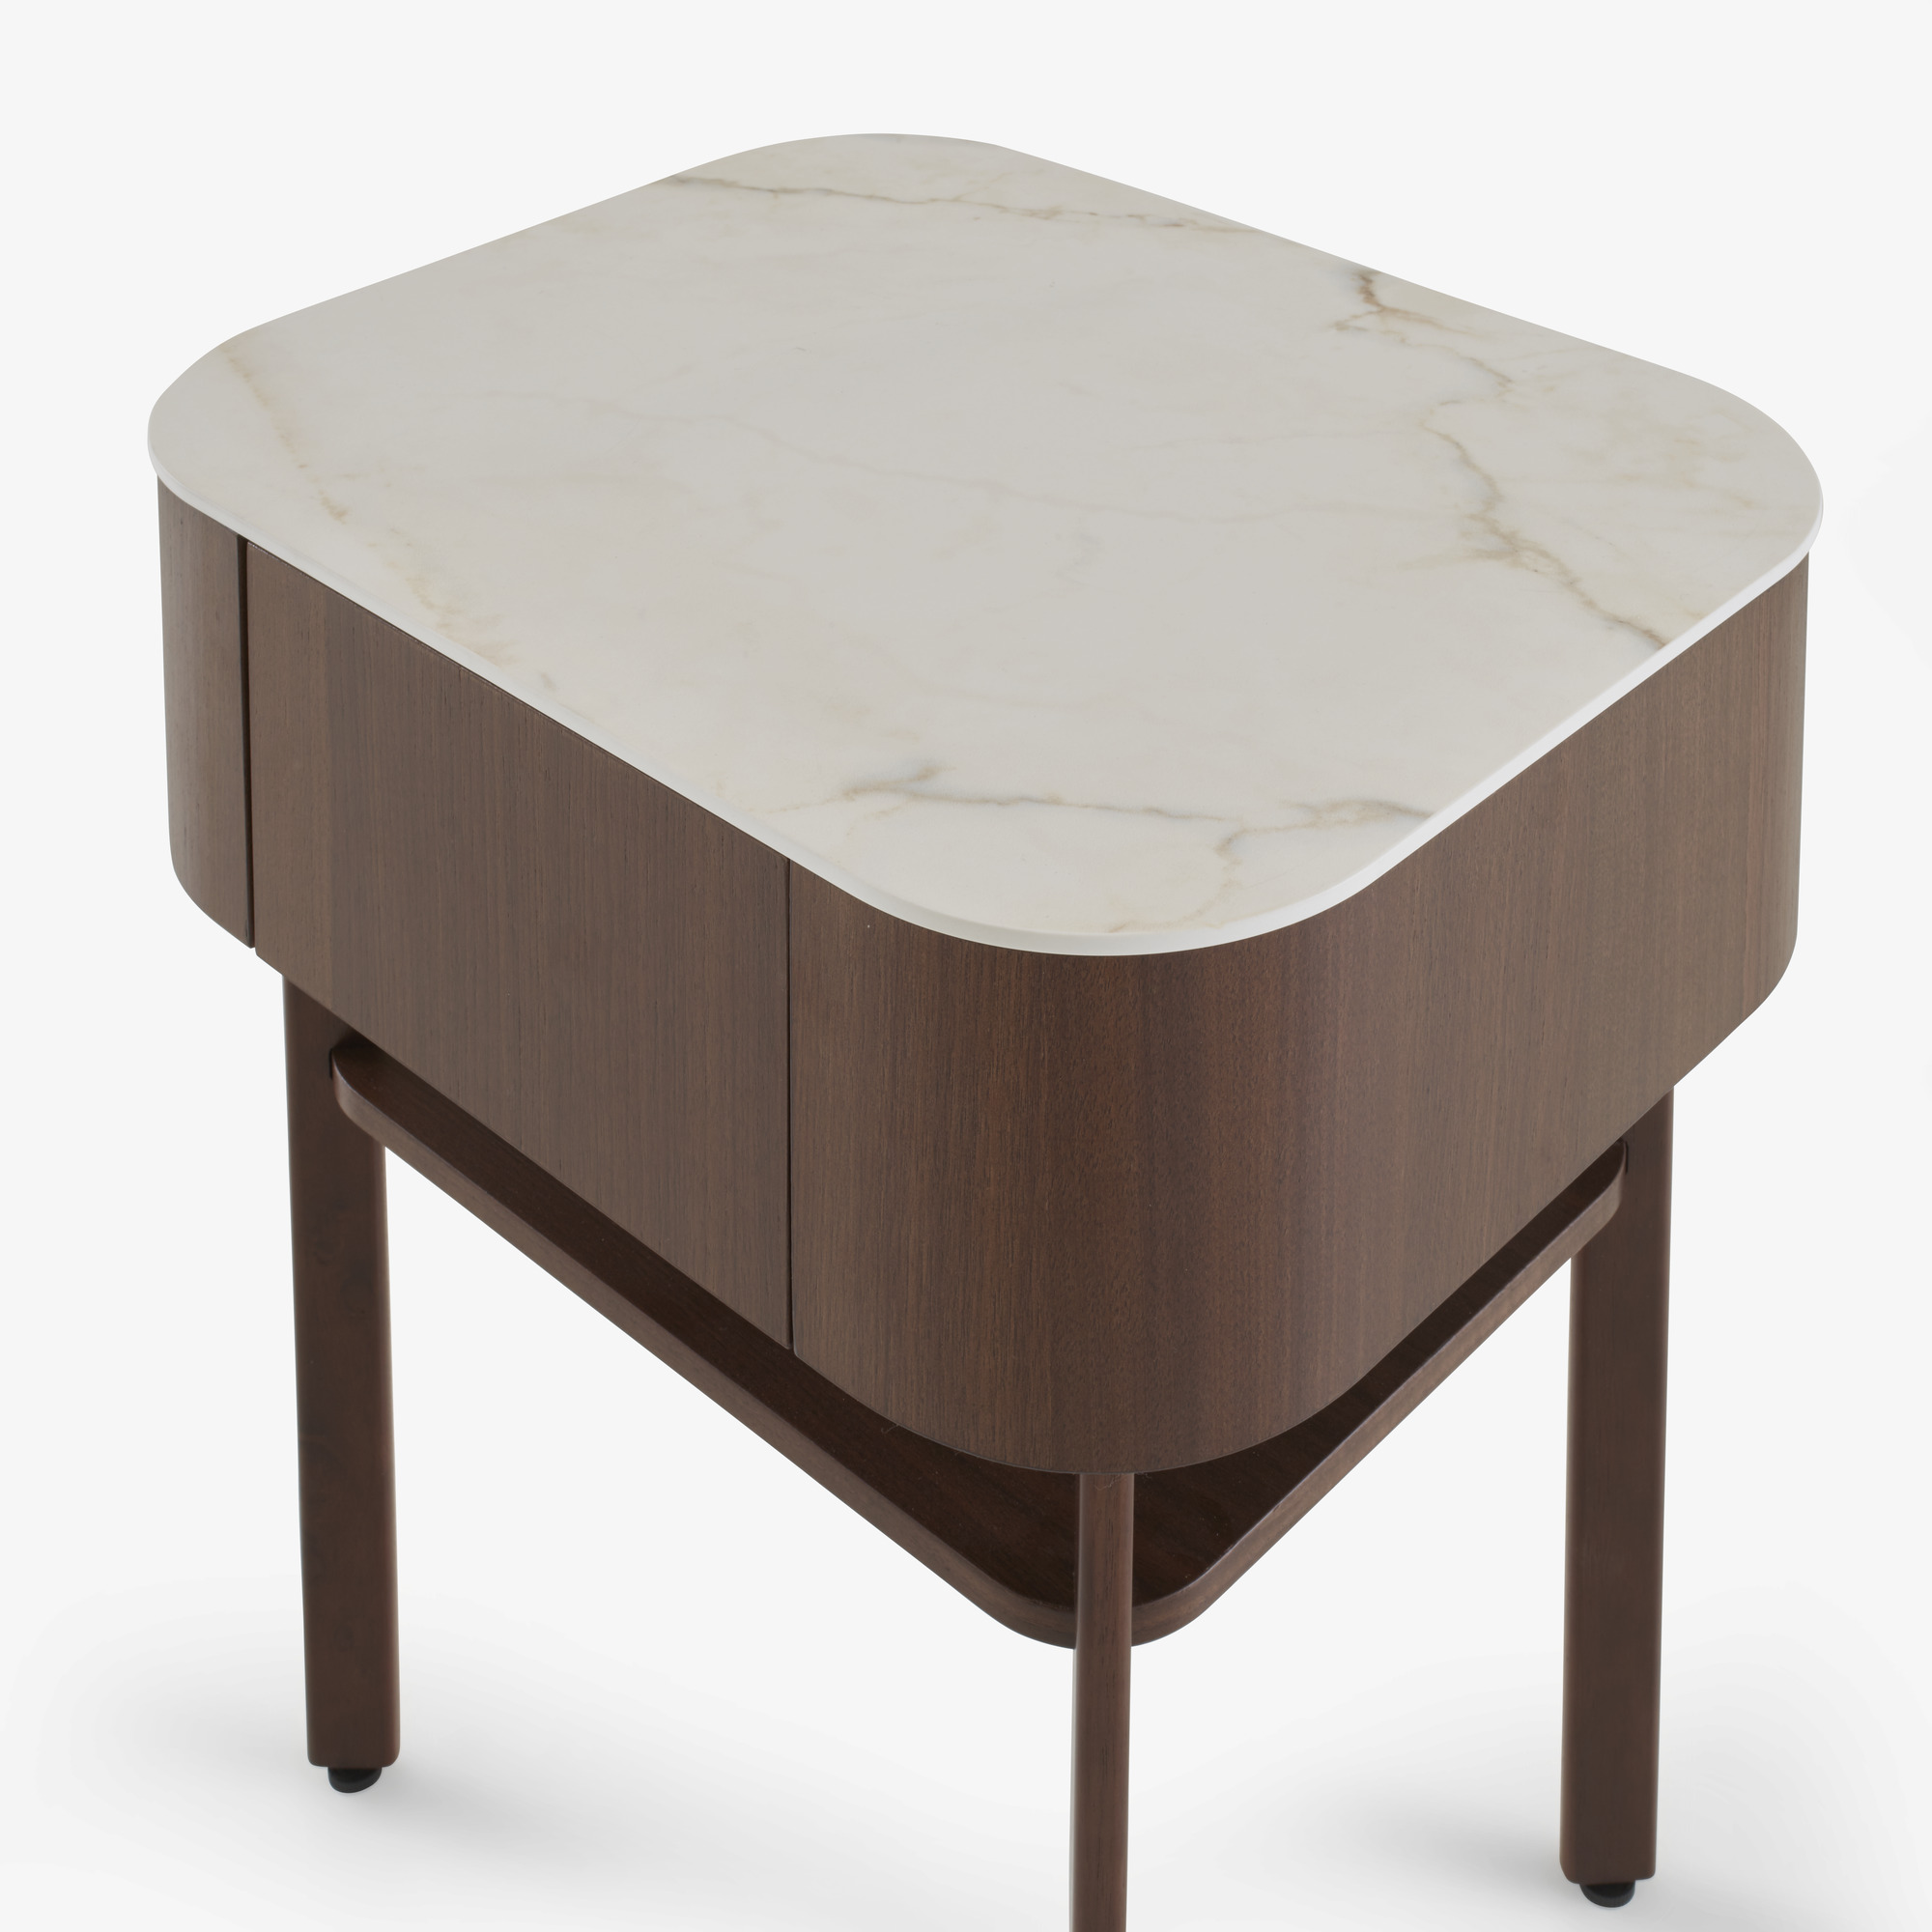 Image Bedside table dark walnut top in white marble-effect ceramic stoneware 5